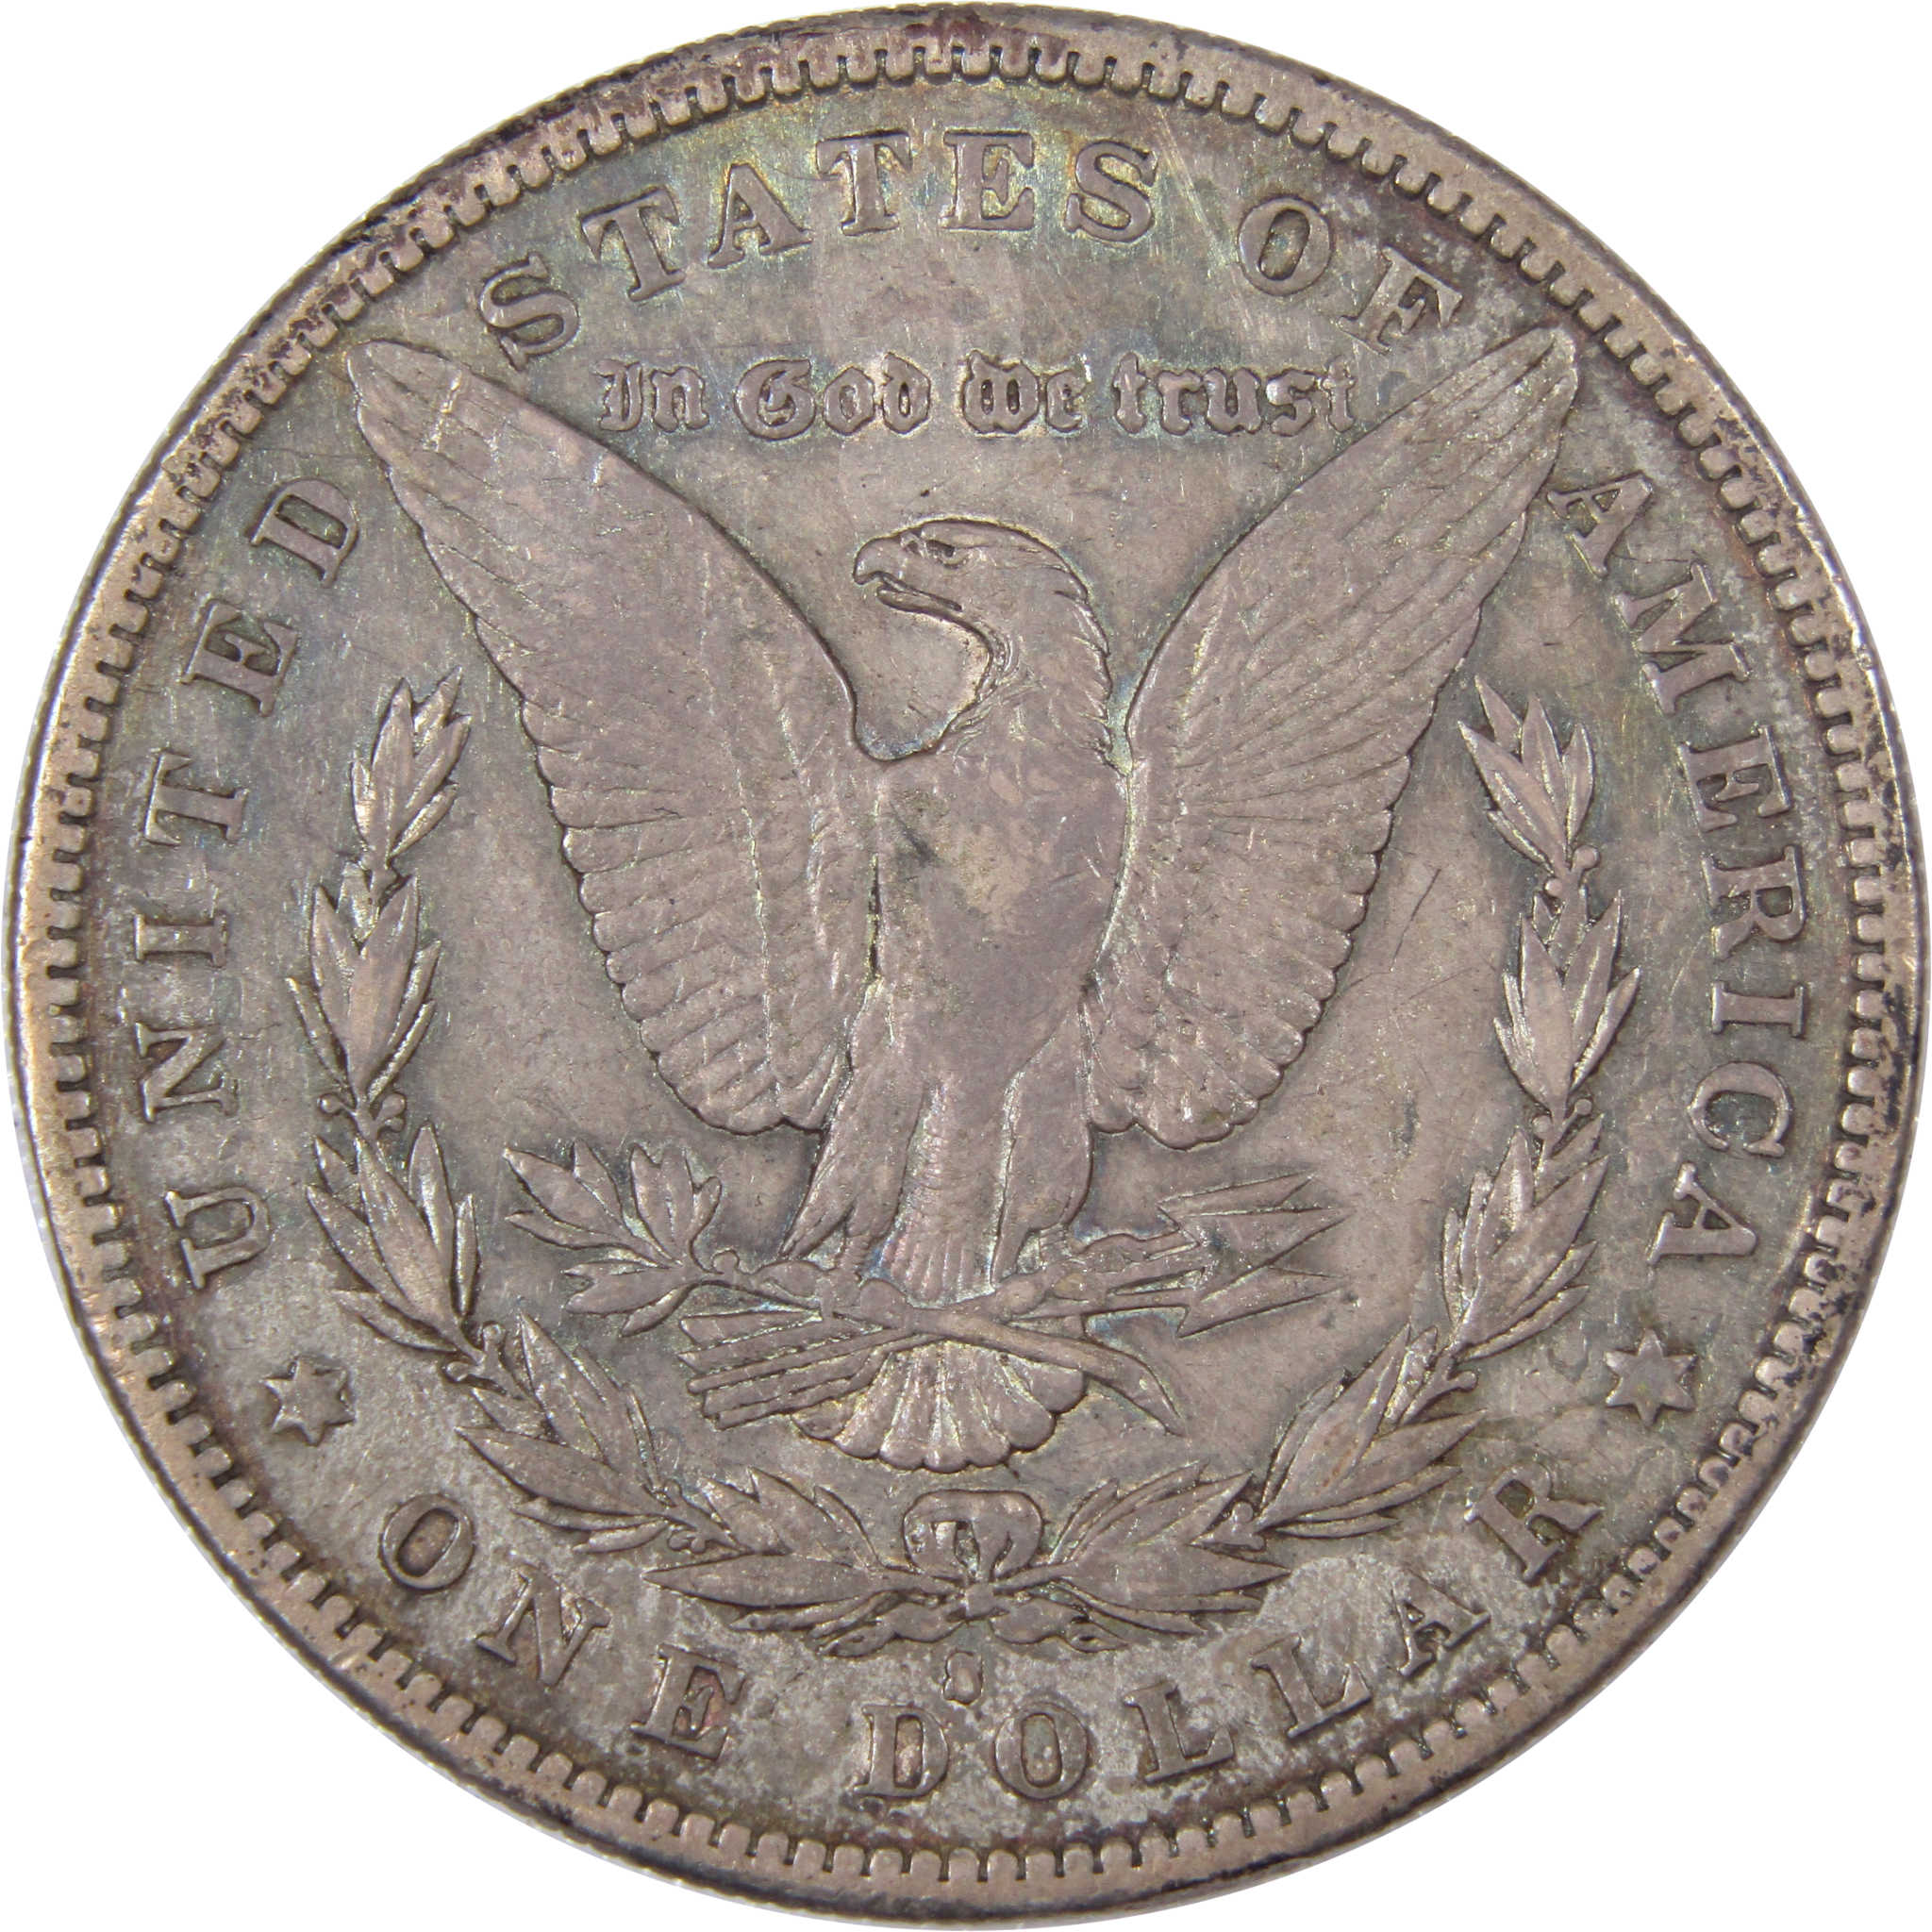 1883 S Morgan Dollar XF EF Extremely Fine 90% Silver SKU:IPC9571 - Morgan coin - Morgan silver dollar - Morgan silver dollar for sale - Profile Coins &amp; Collectibles